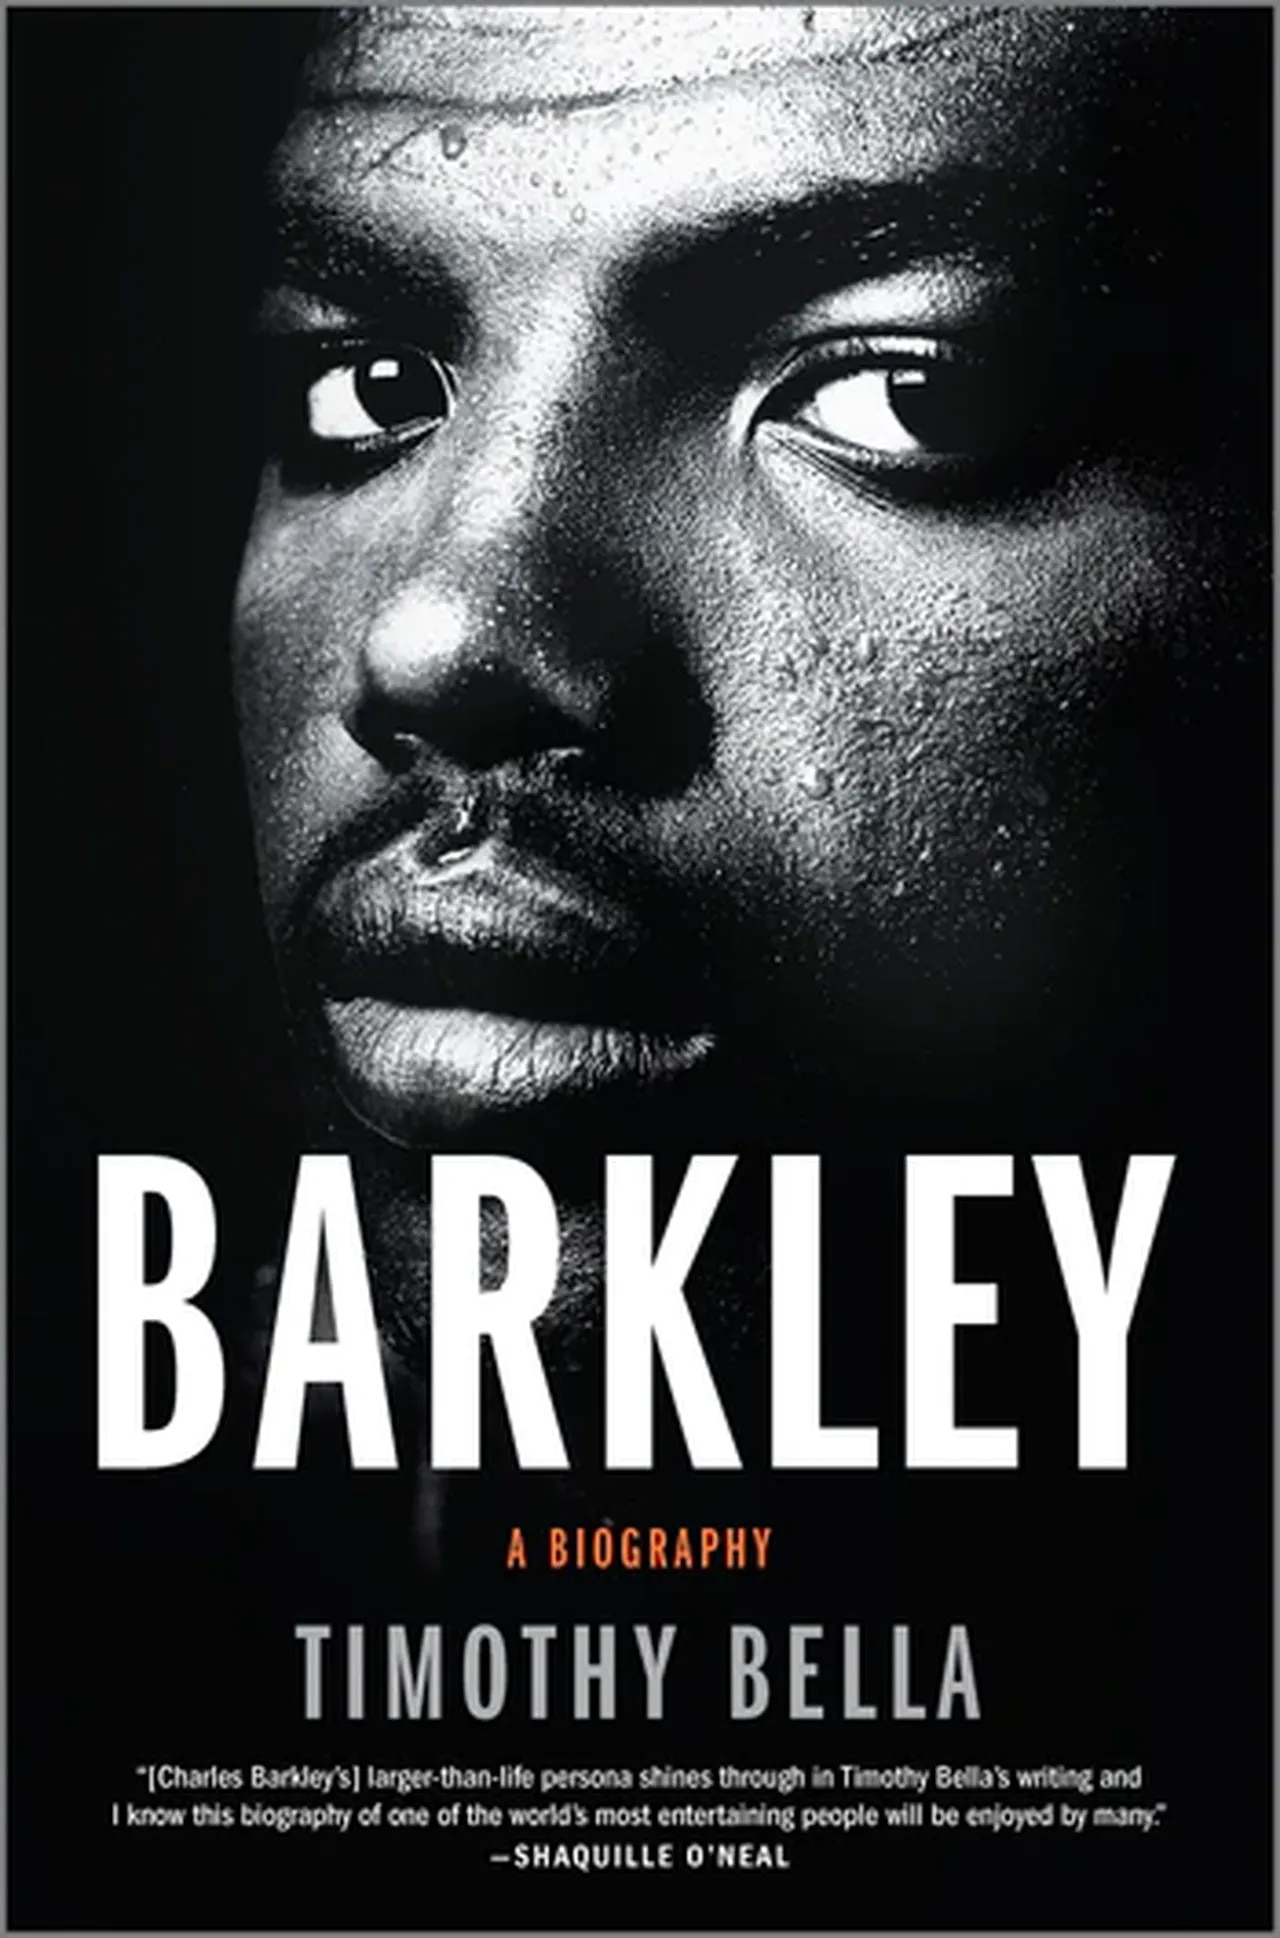 Q&A with Timothy Bella, author of 'Barkley: A Biography'